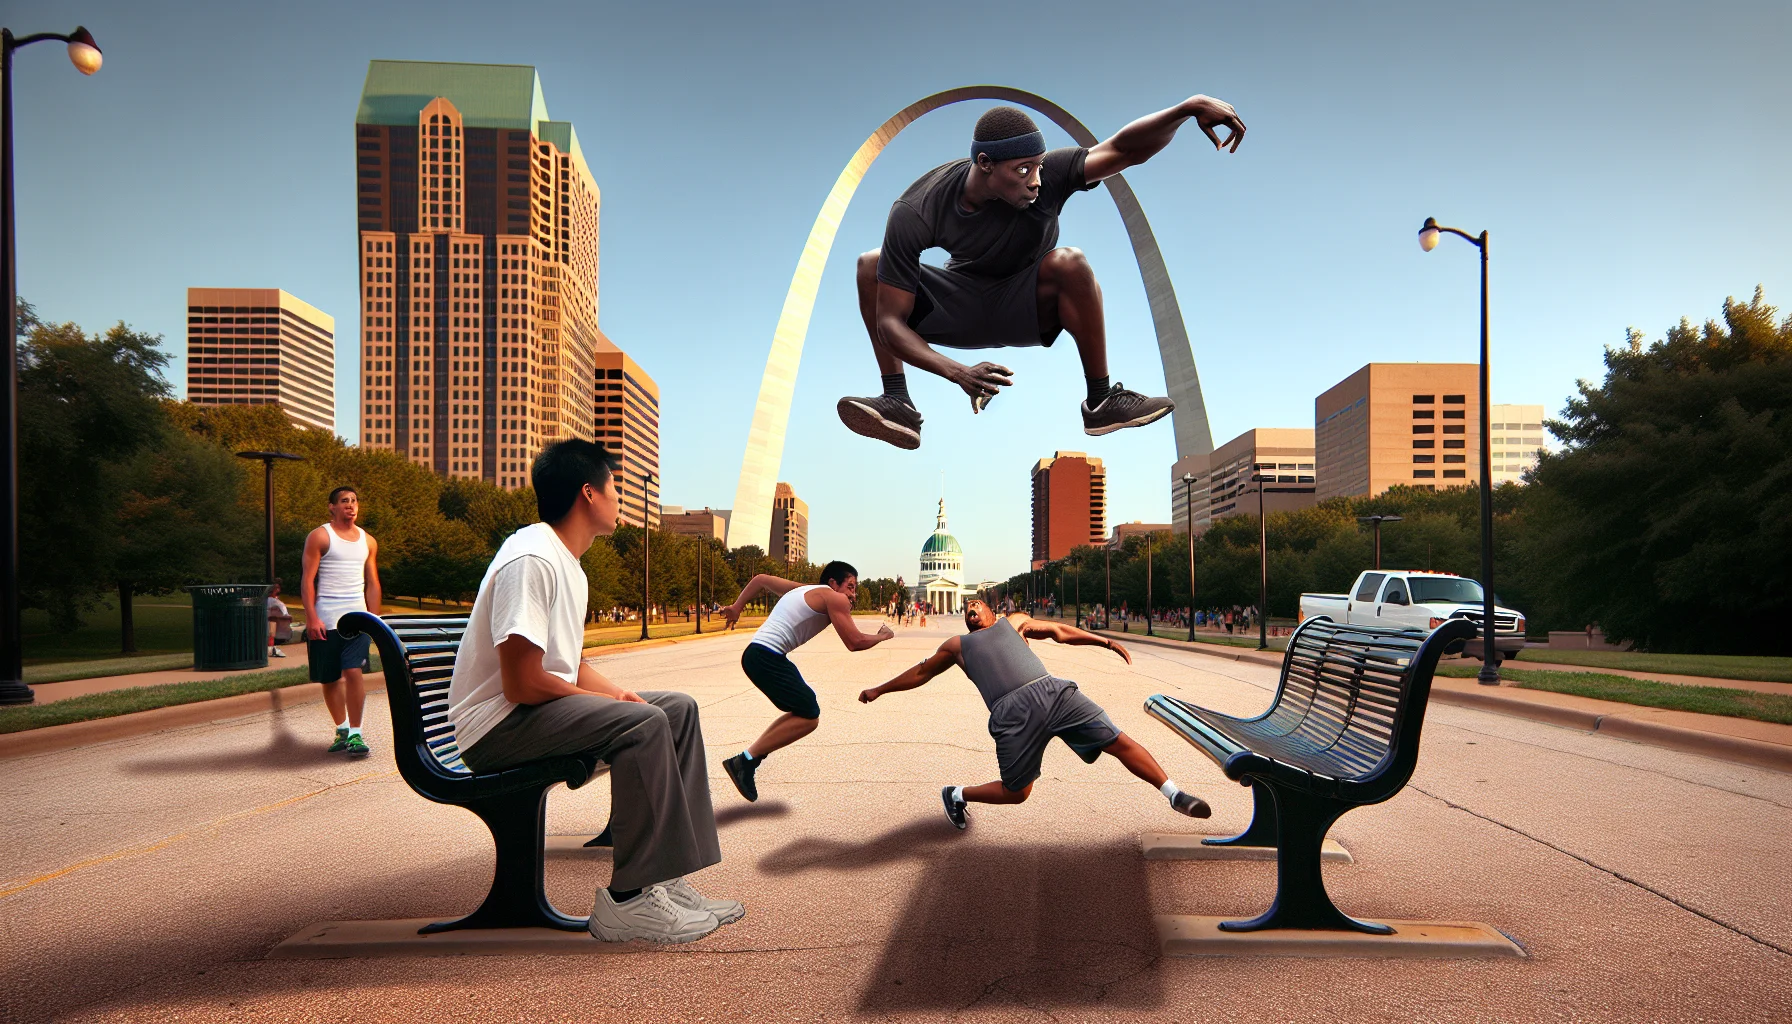 Generate a playful and humorous image capturing the spirit of parkour in an urban setting, specifically St. Louis, Missouri. The scene might include a person of Black descent nonchalantly leaping over a city bench, as if it were a usual part of their daily commute, while a confused onlooker of Hispanic descent tries to do the same in the background. The lofty Gateway Arch could be visible in the distance, suggesting the fun and fitness potential of the cityscape. Let this image encourage viewers to engage in exercise and physical fitness.